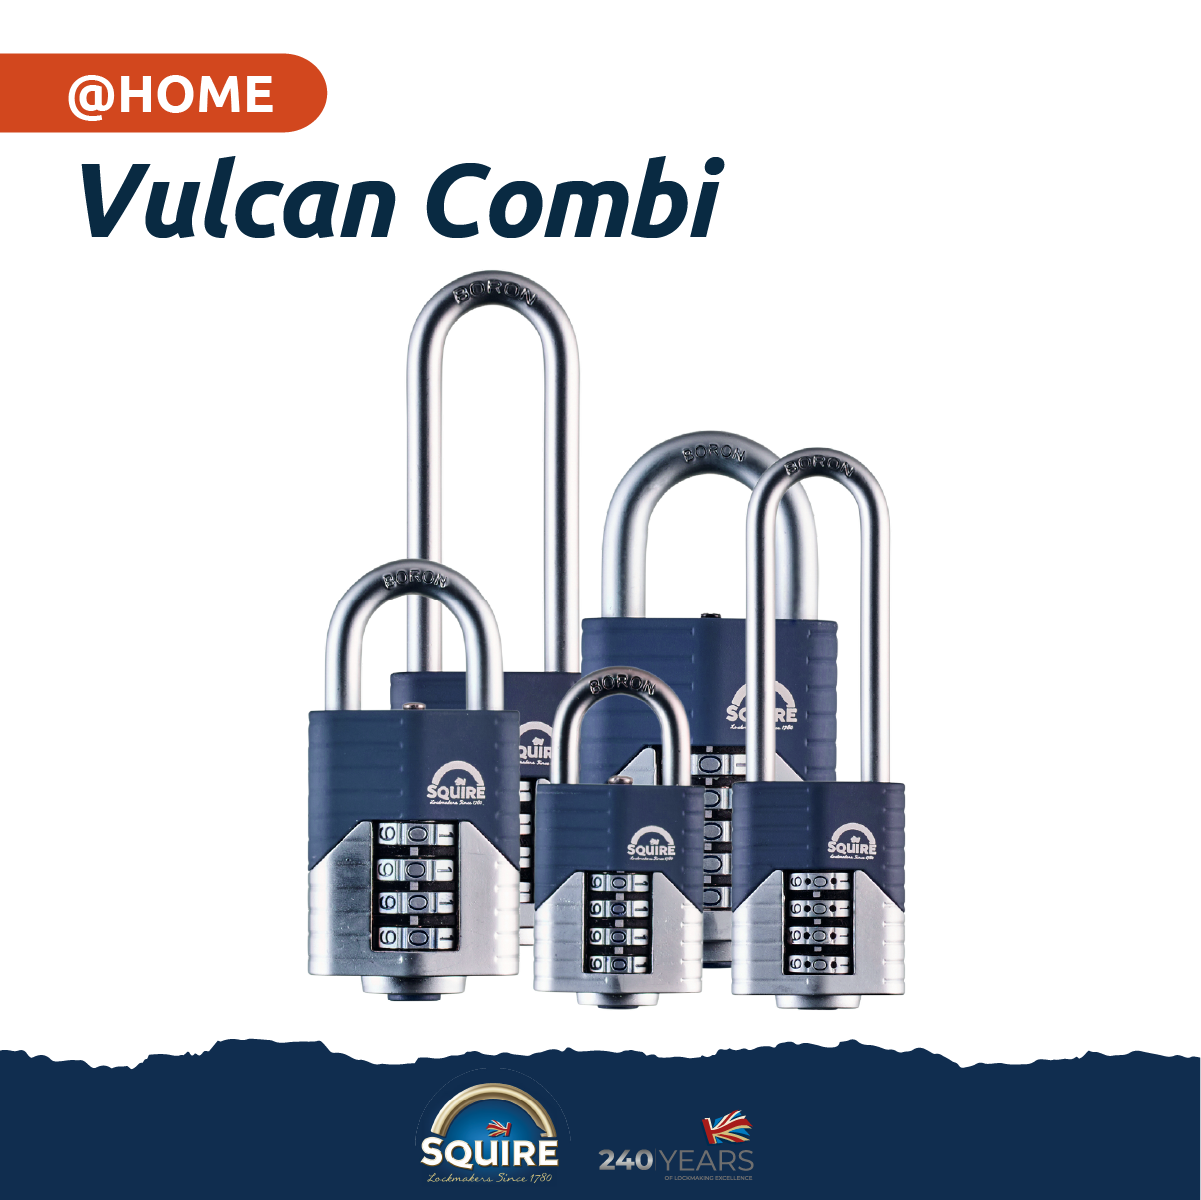 Vulcan Case Hardened Security Chain And Lock Kits